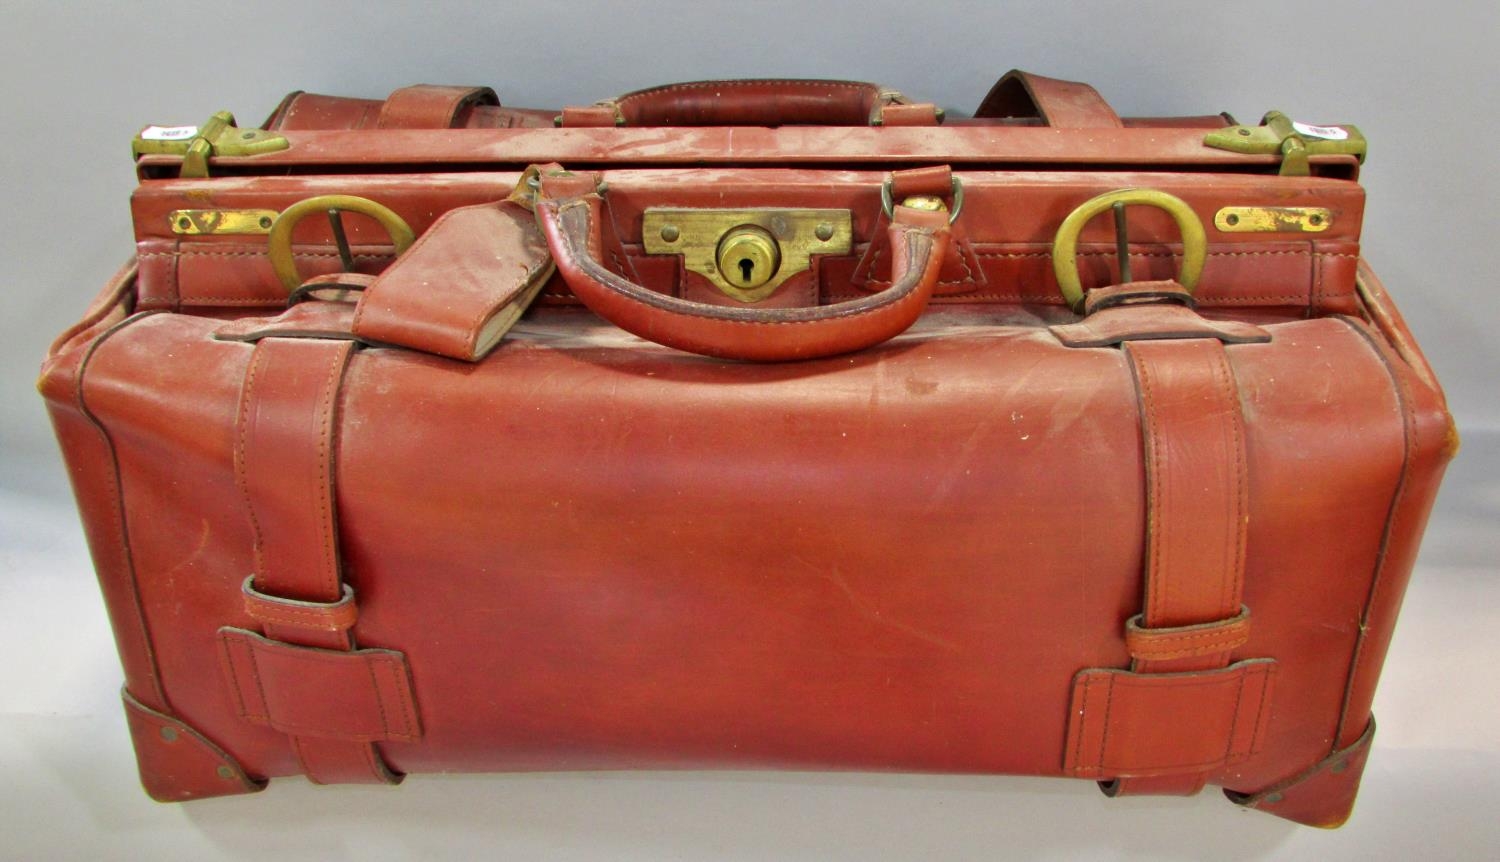 A Vintage Swain Adeney brown leather Gladstone bag, with decent stitching and fastenings